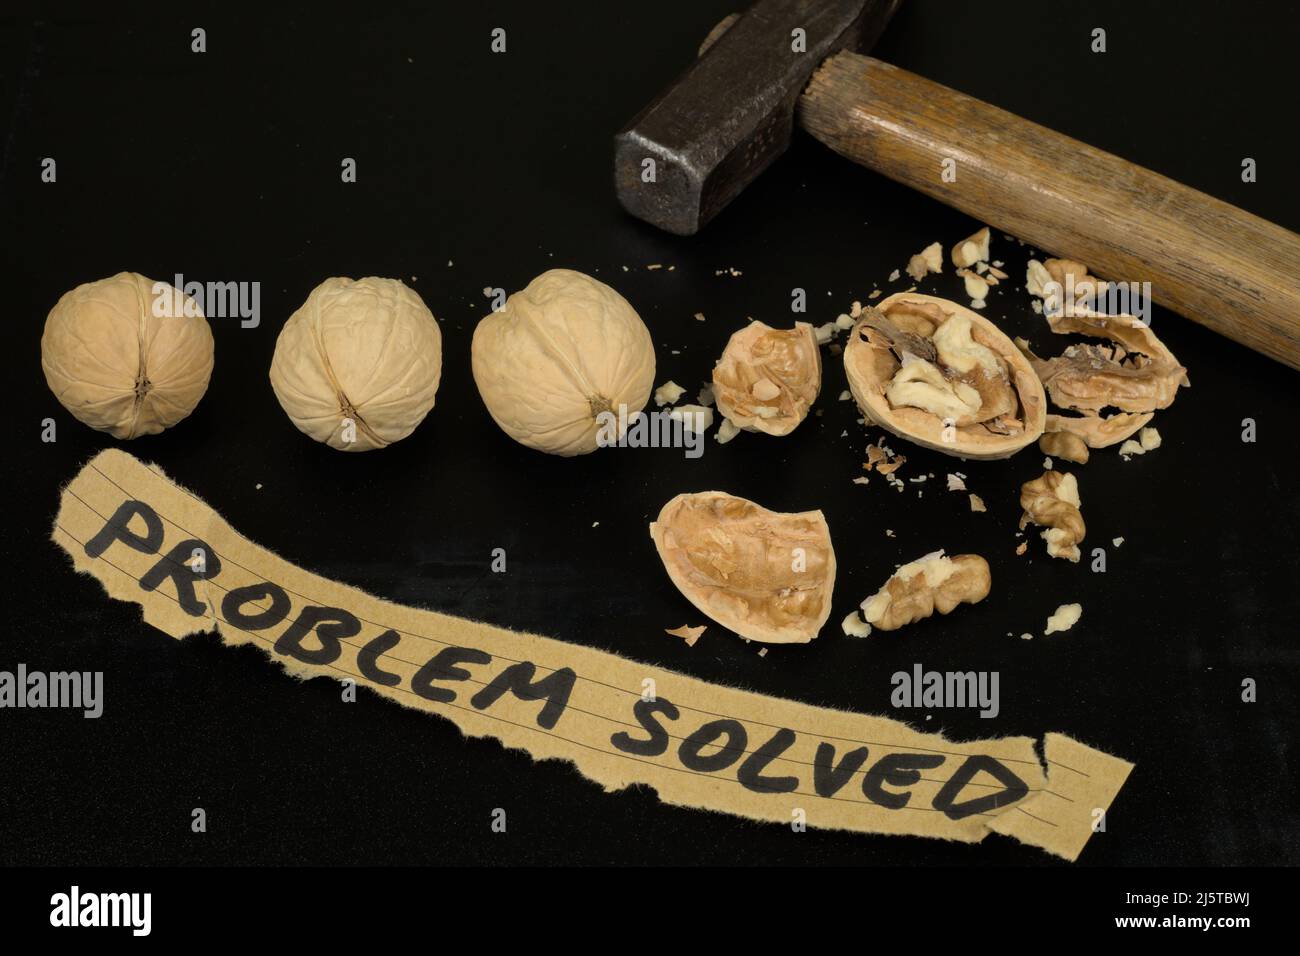 Four walnuts (one of them cracked) and a hammer on a dark scratched background (illustration of problem solving) Stock Photo